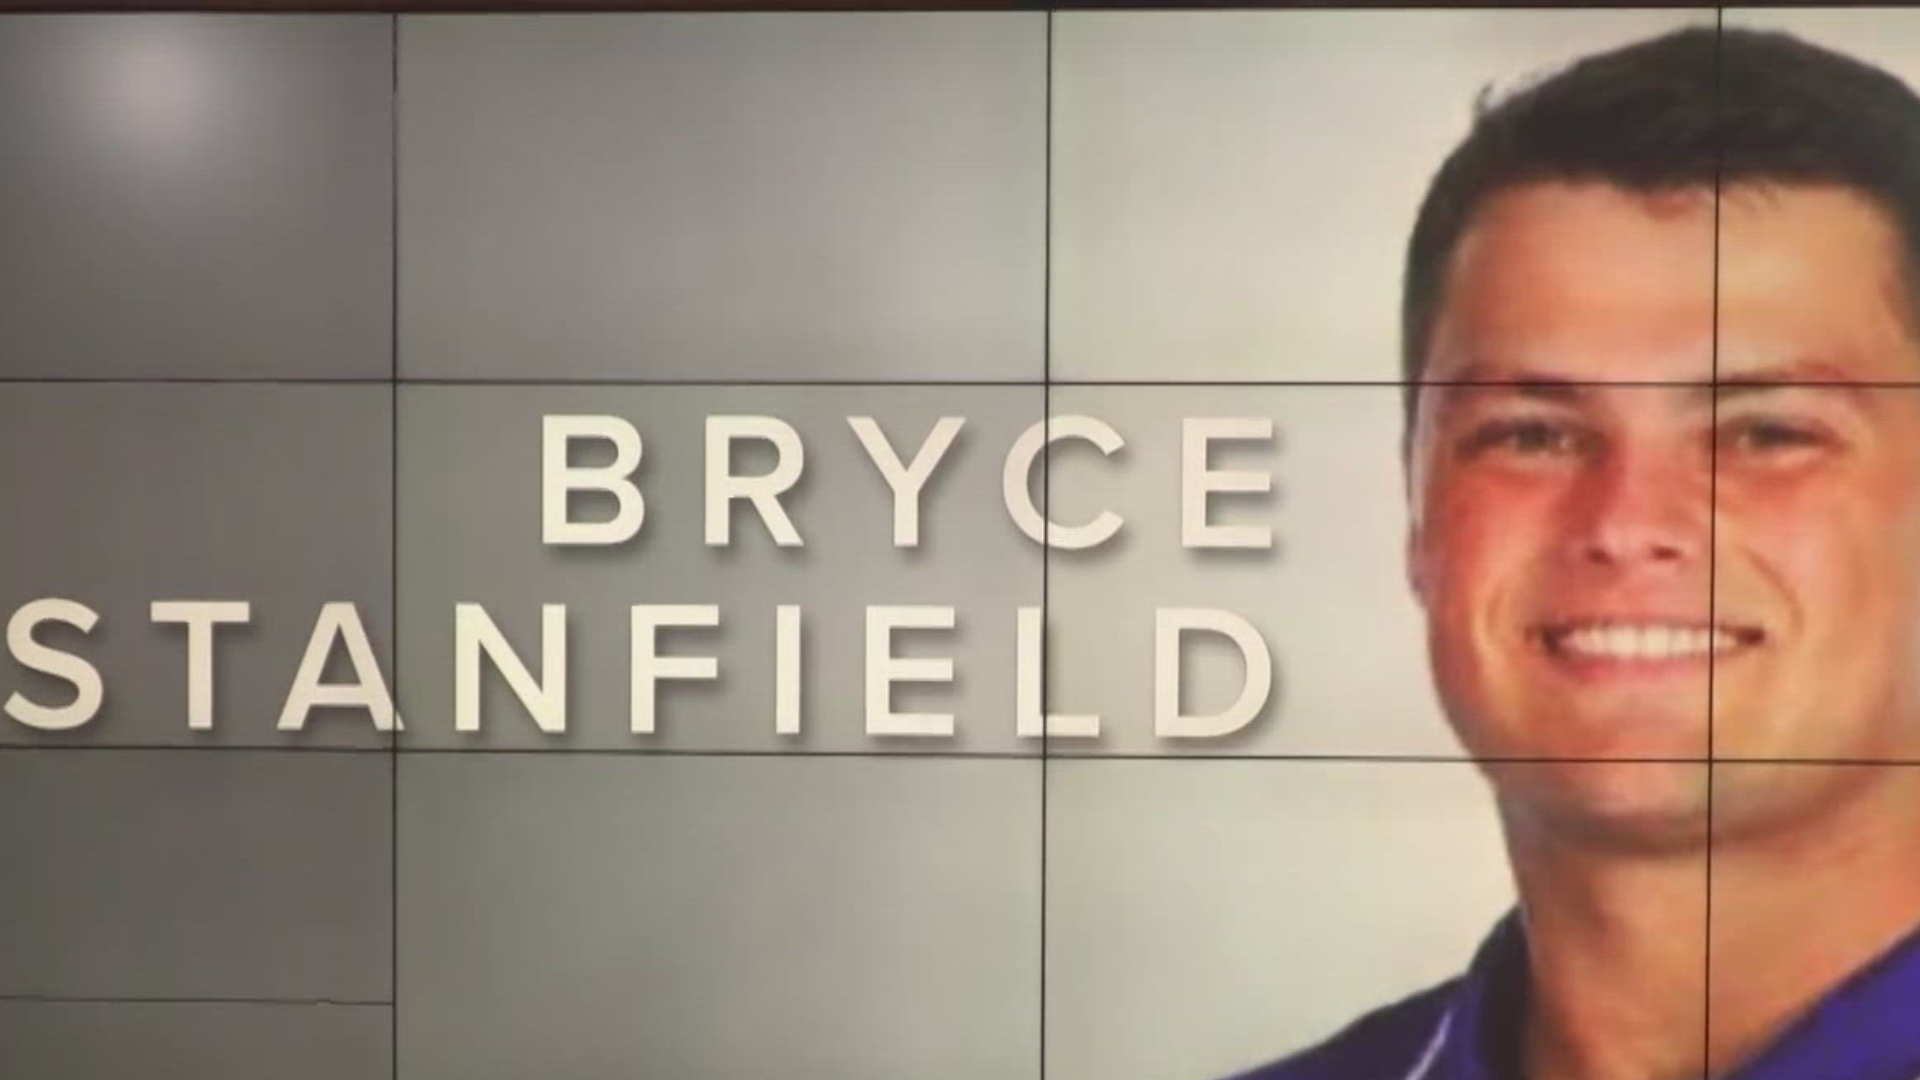 Bryce Stanfield, 21, passed away Friday, according to school officials.